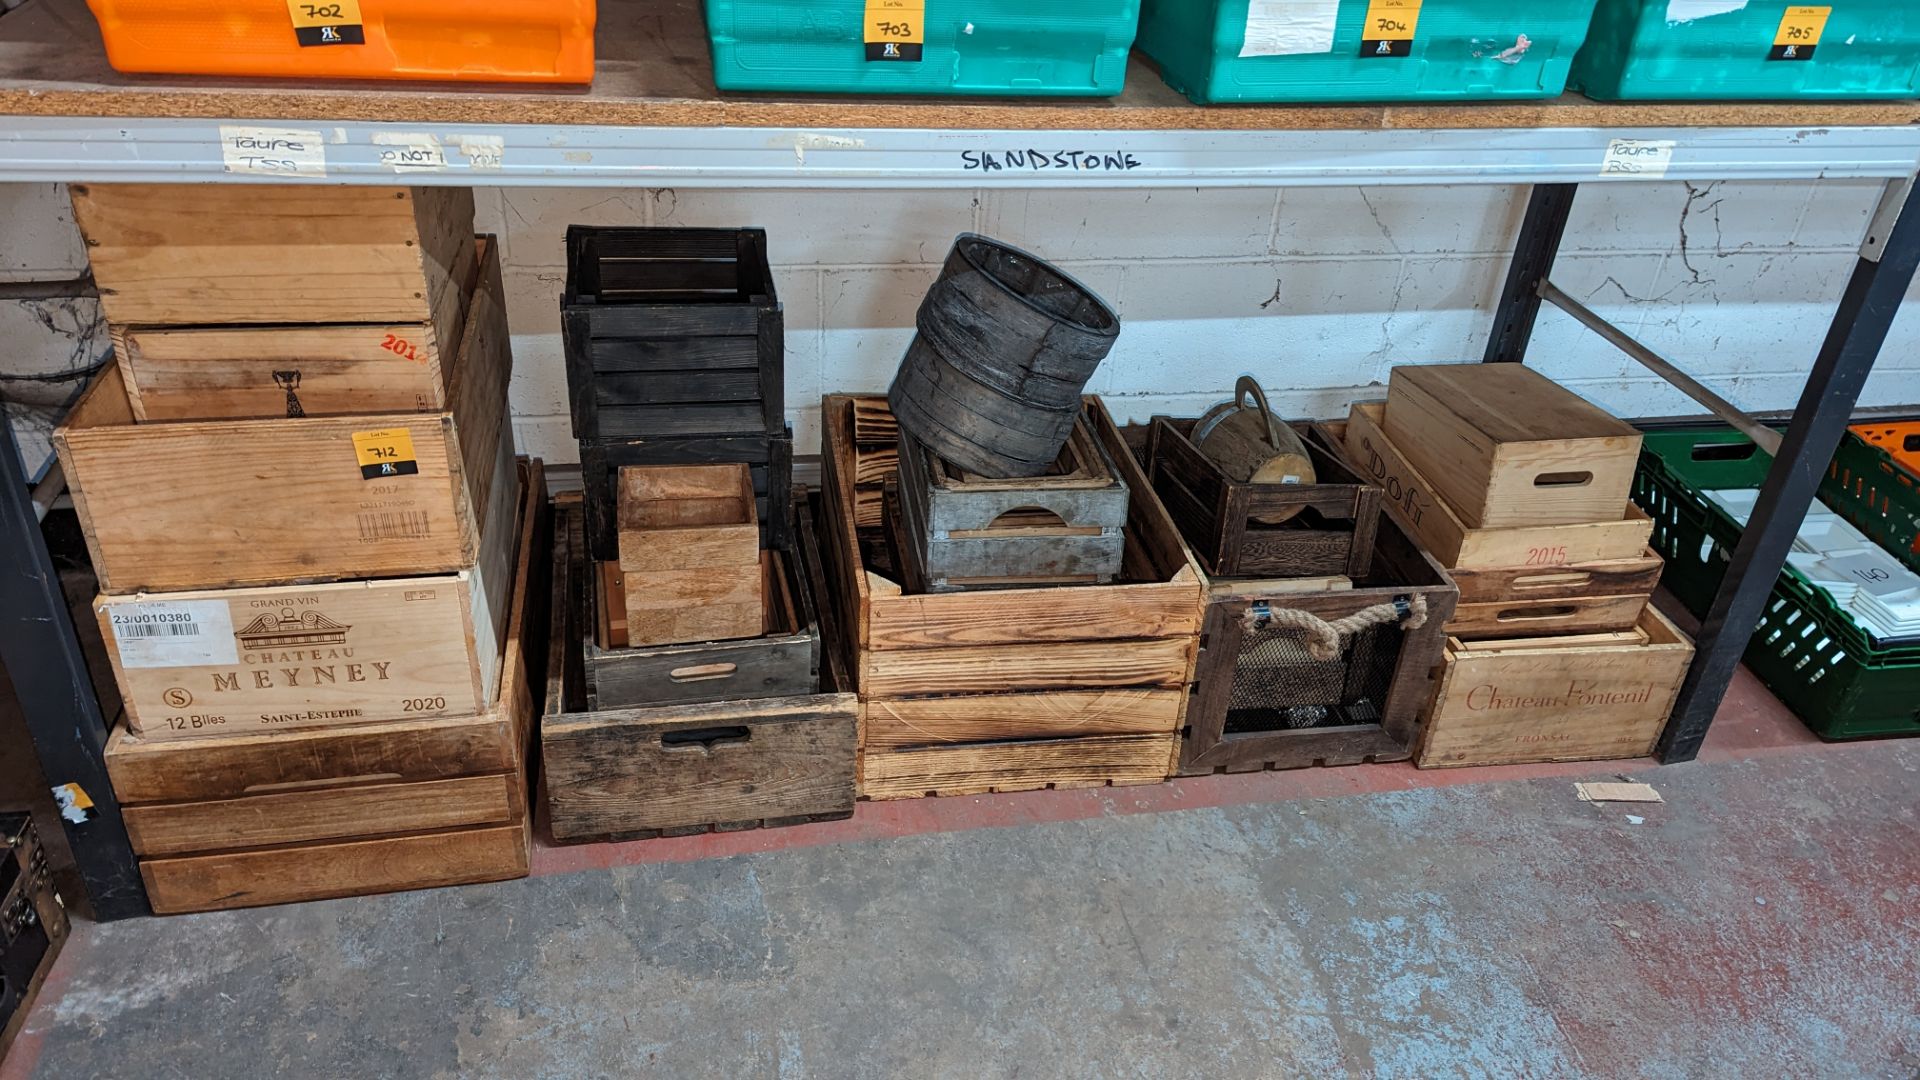 The contents of a bay of assorted wooden crates & boxes